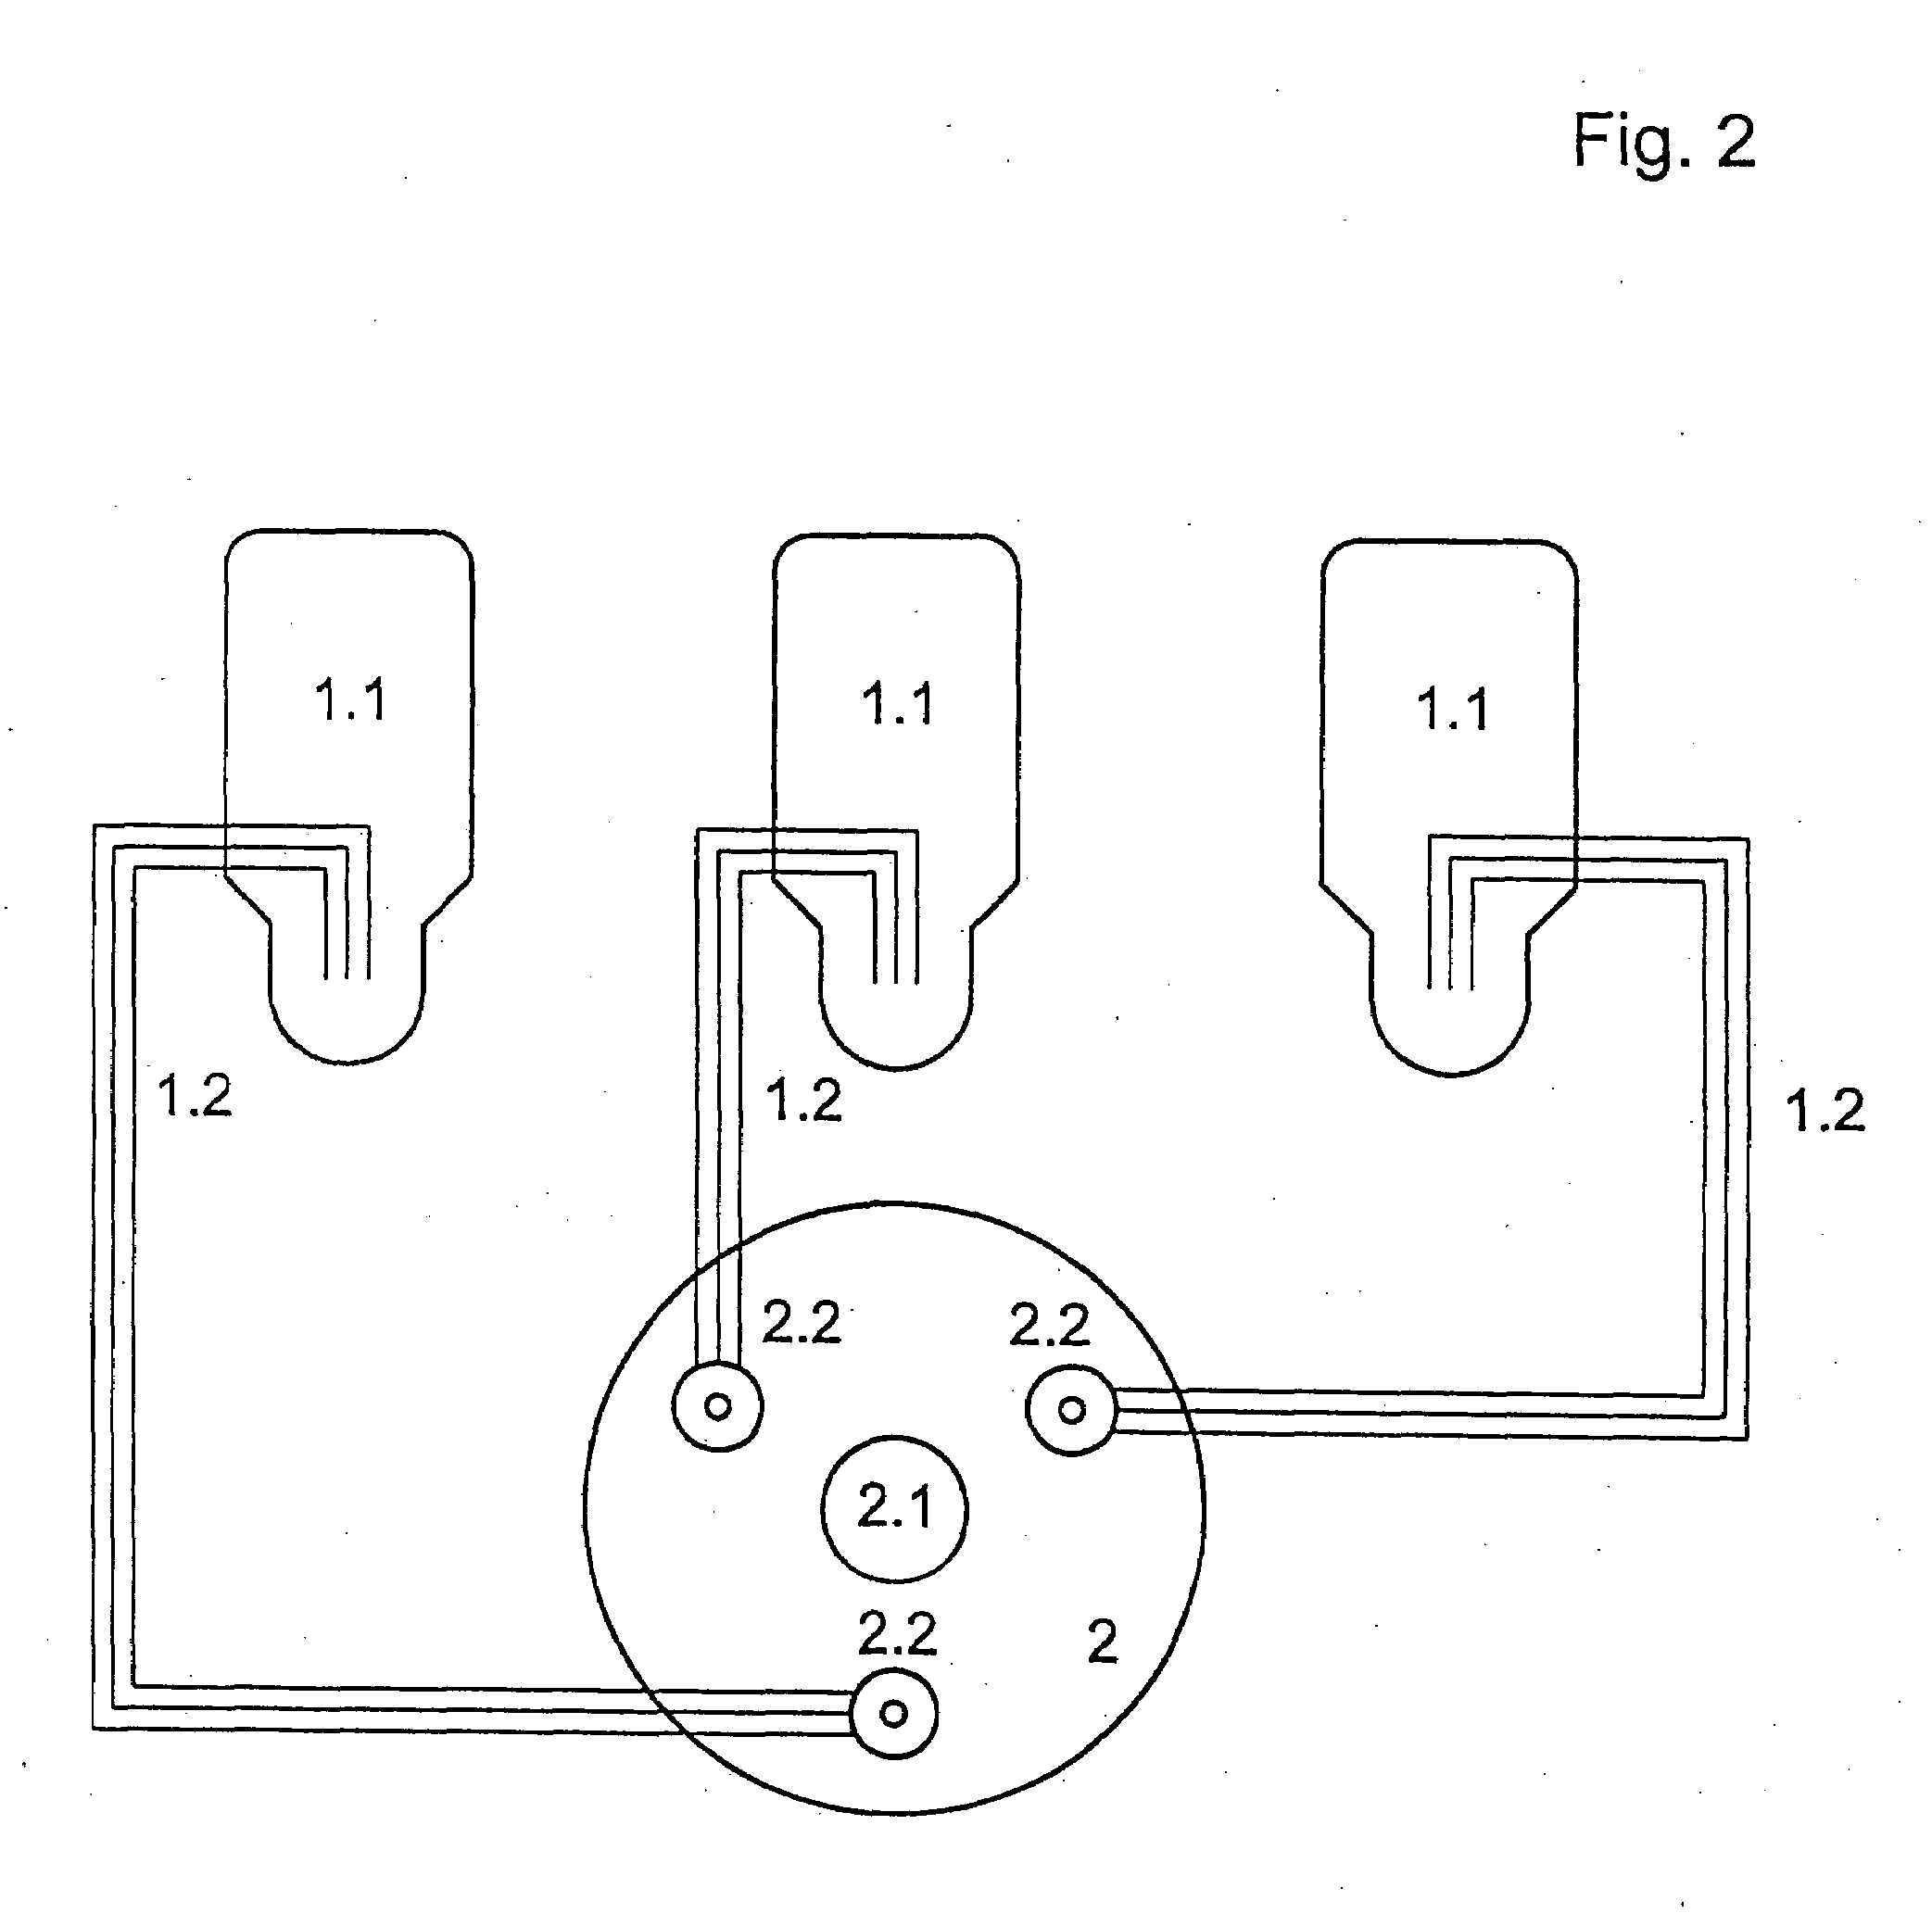 Method for starting high-performance entrained flow gasification reactors with combination burner and multiple burner array